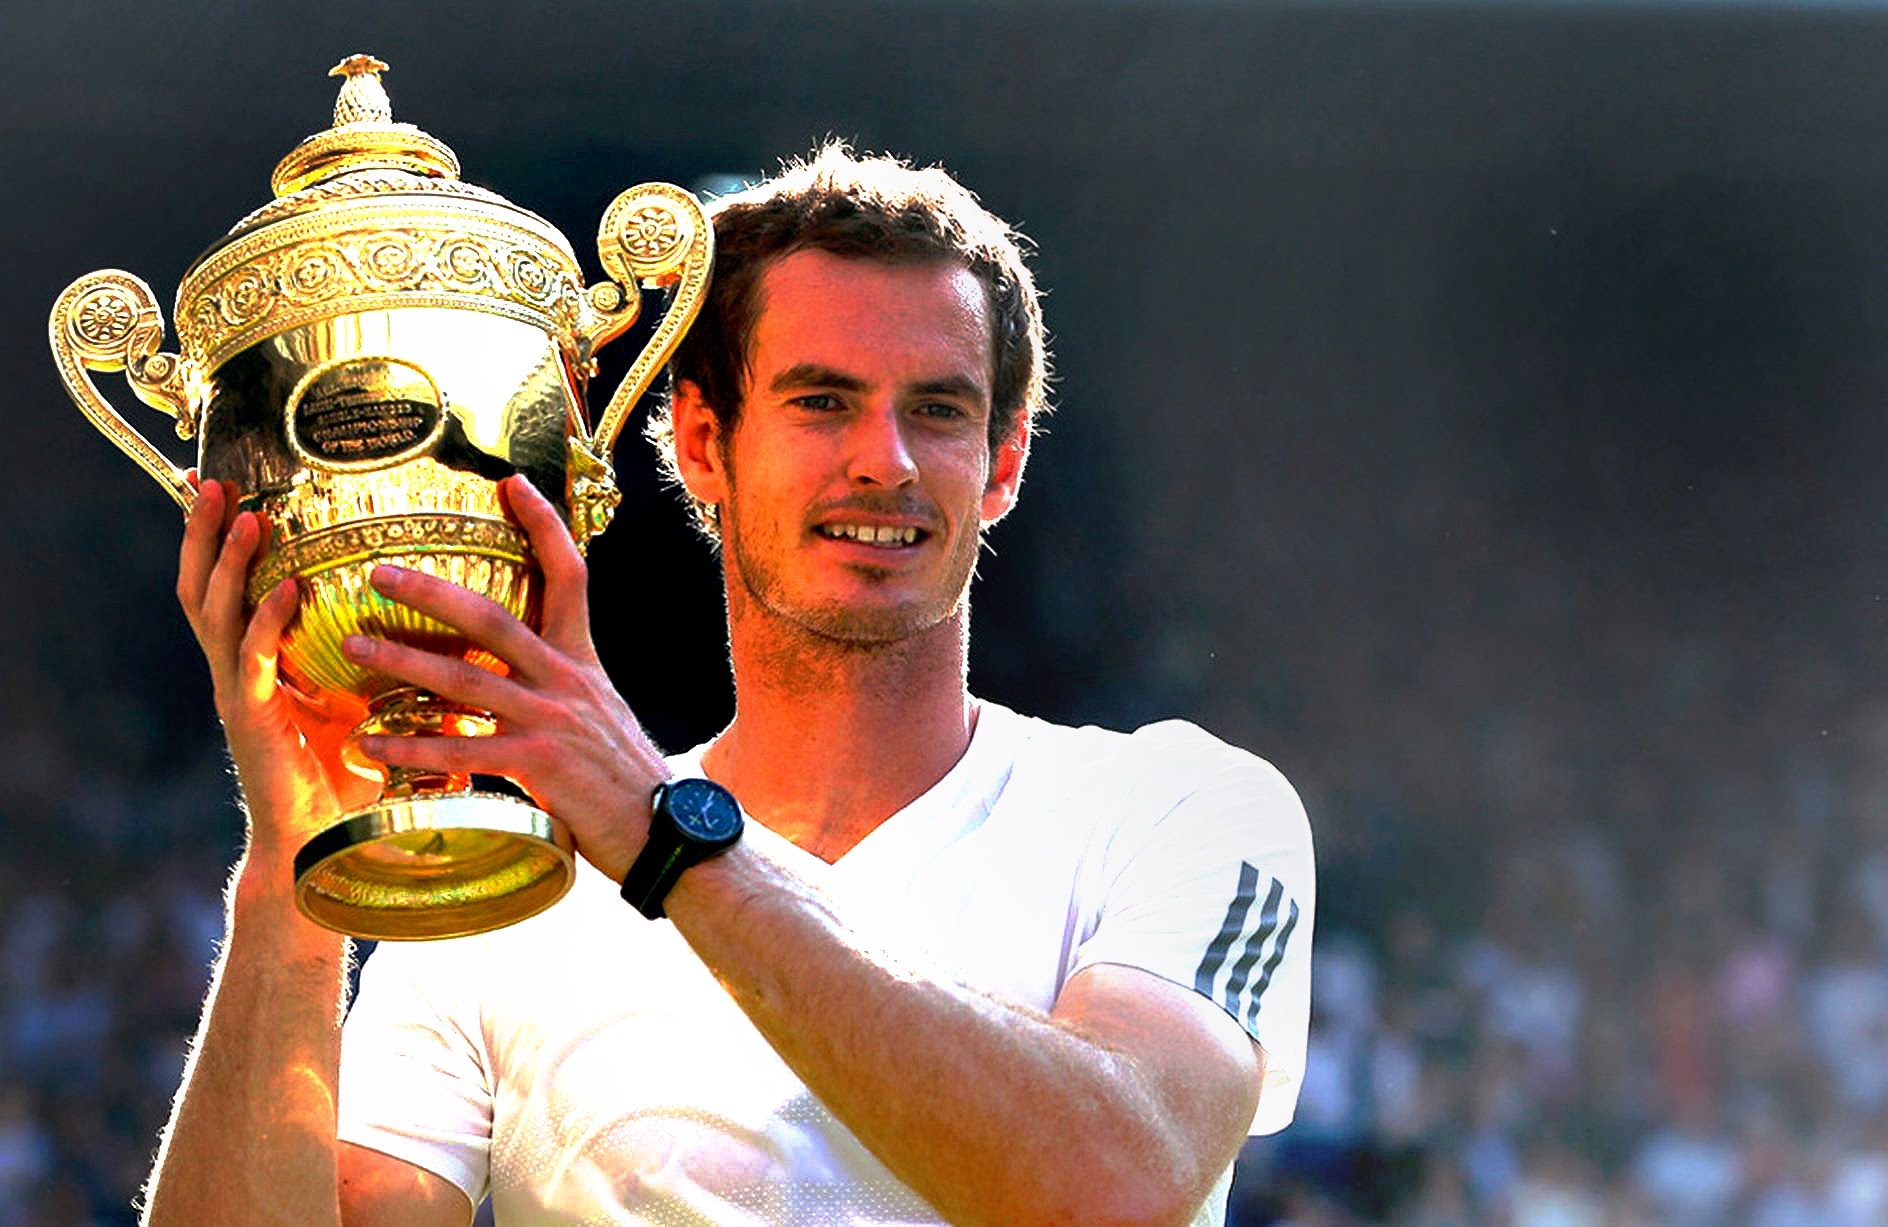 Wrist Watch Brands Endorsed Promoted advertised by tennis stars players Sir Andy Murray – Rado